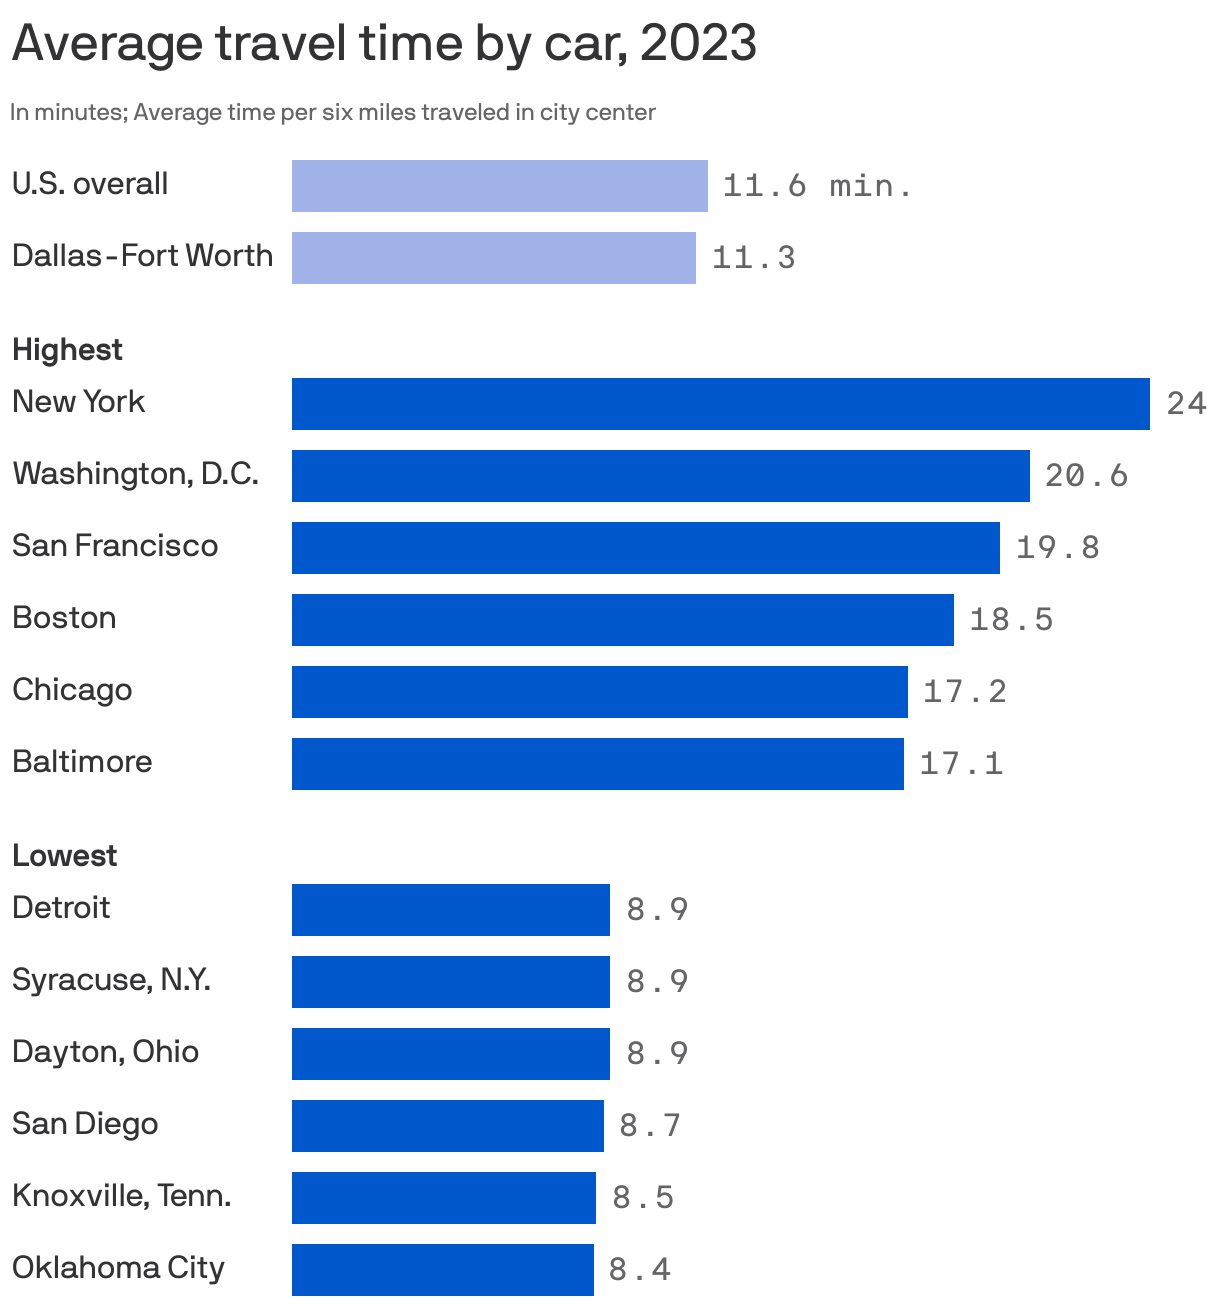 Average travel time by car, 2023